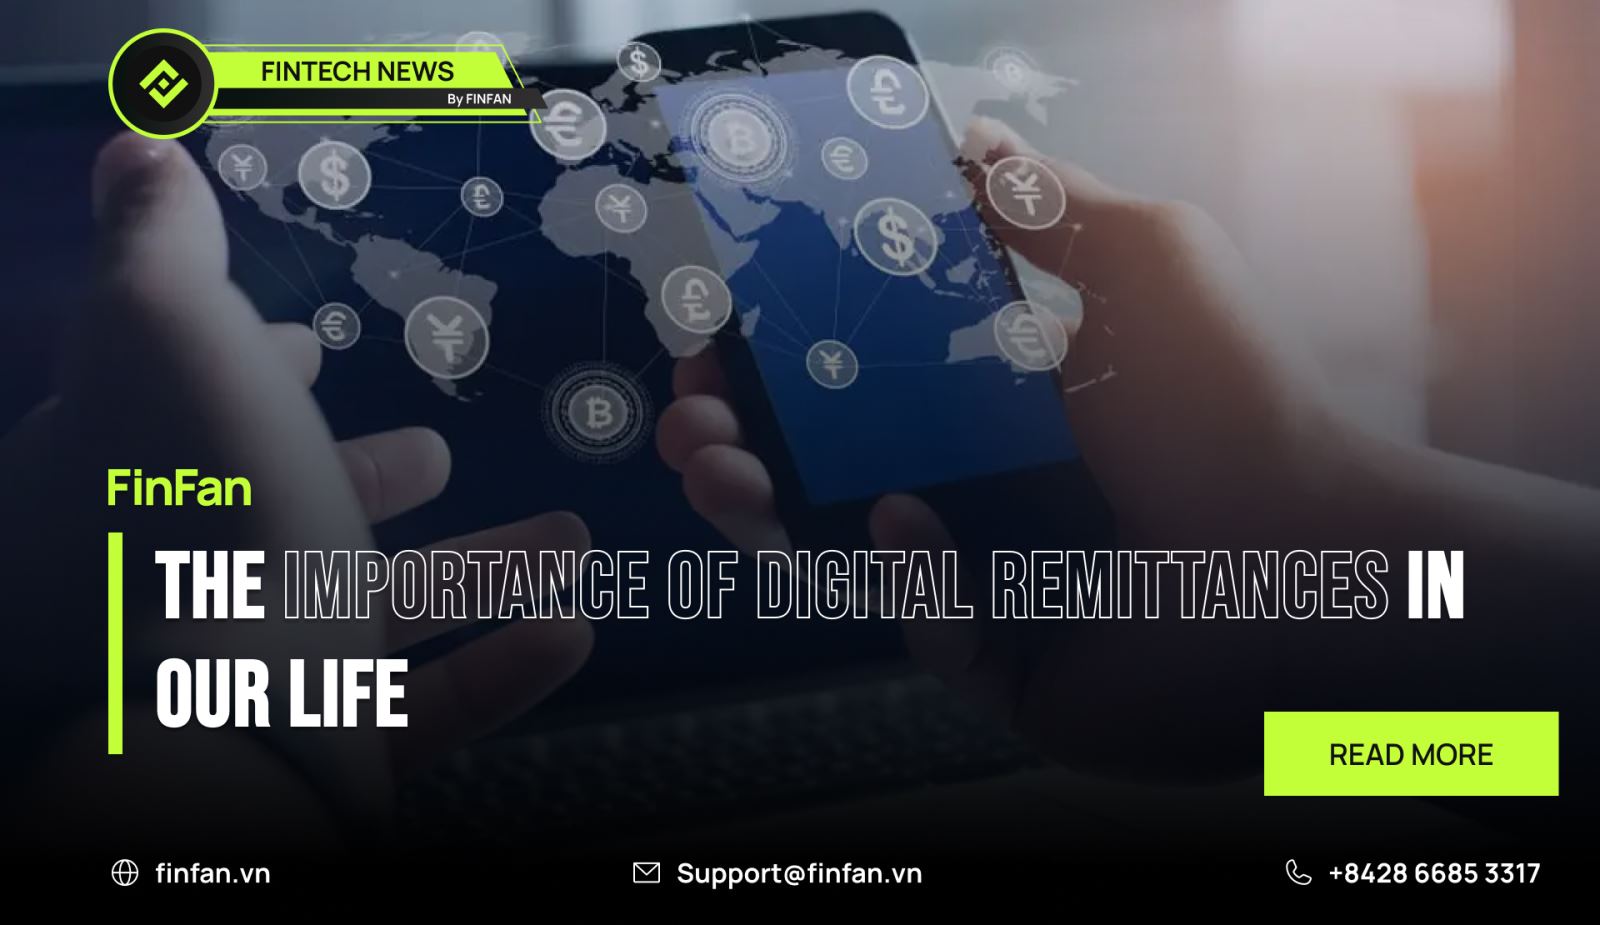 The importance of digital remittances in our life